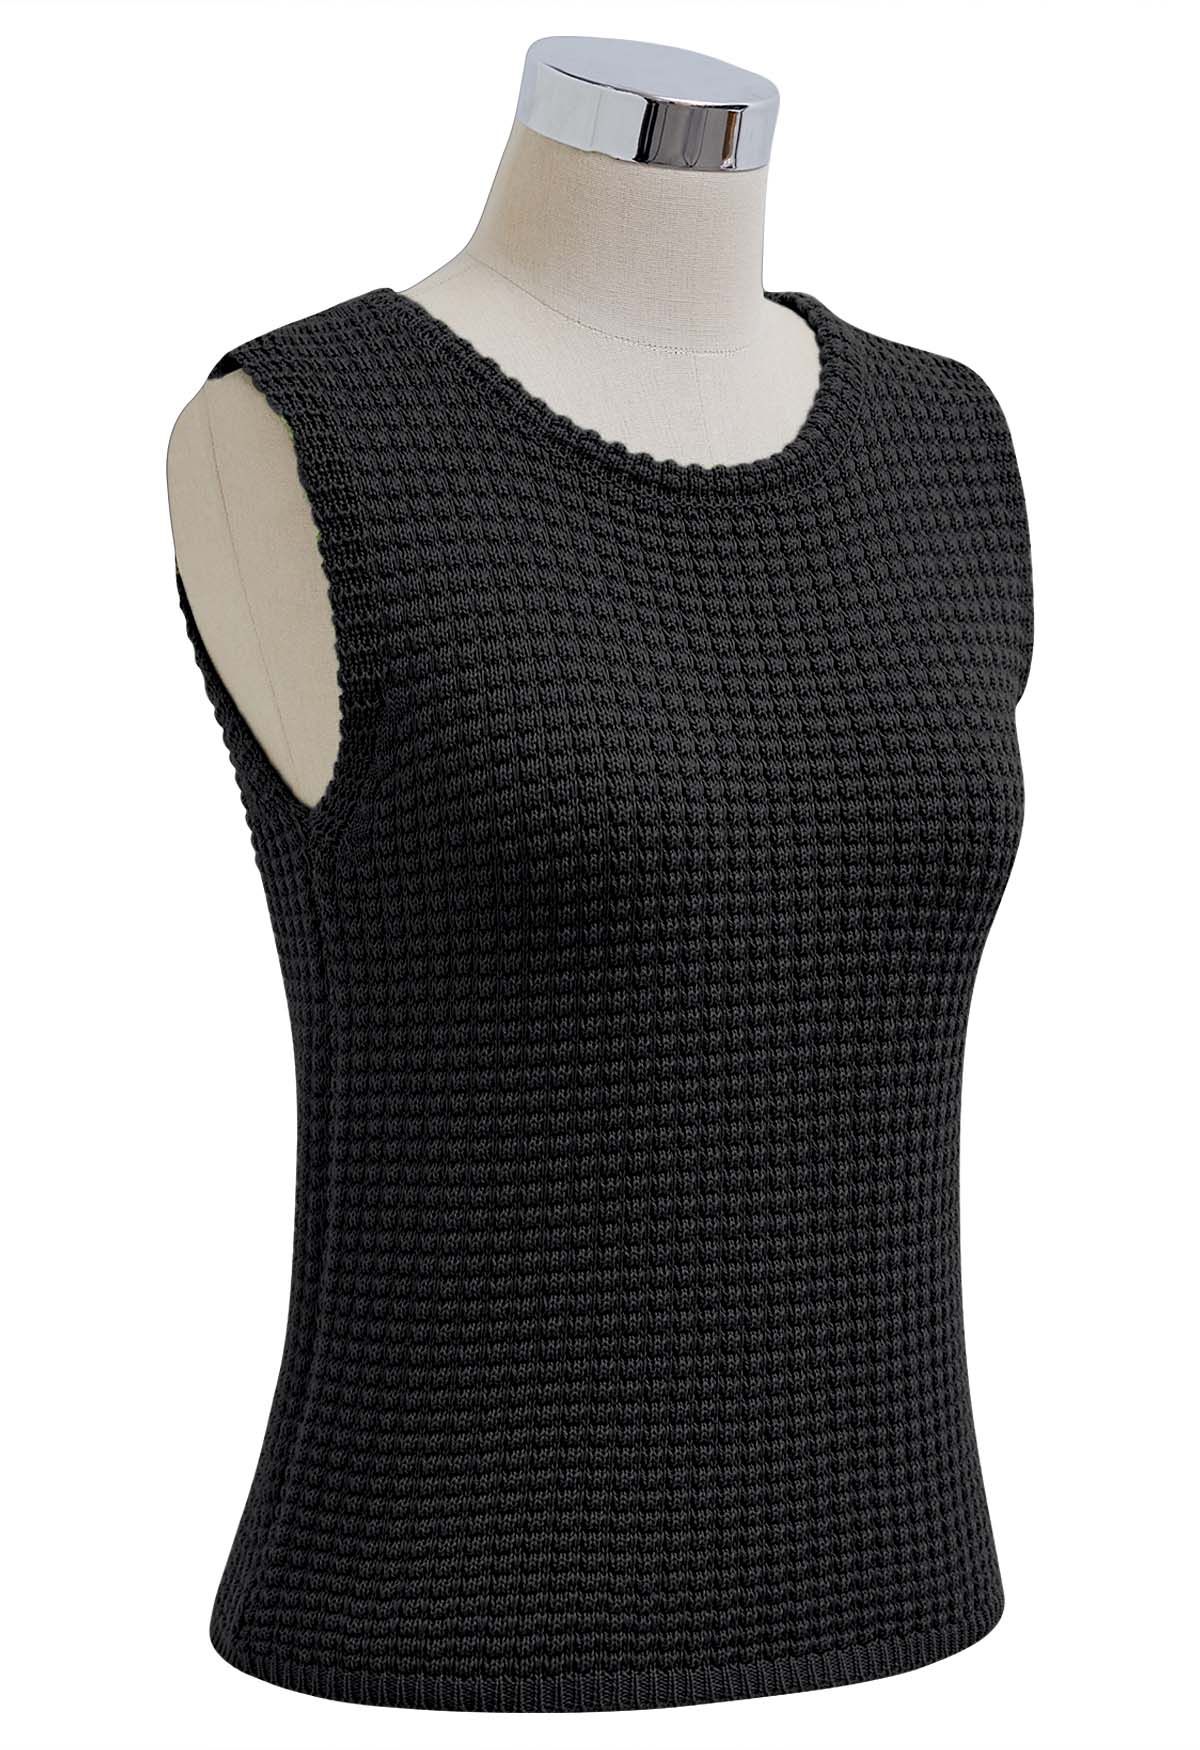 Solid Color Openwork Knit Sleeveless Top in Black